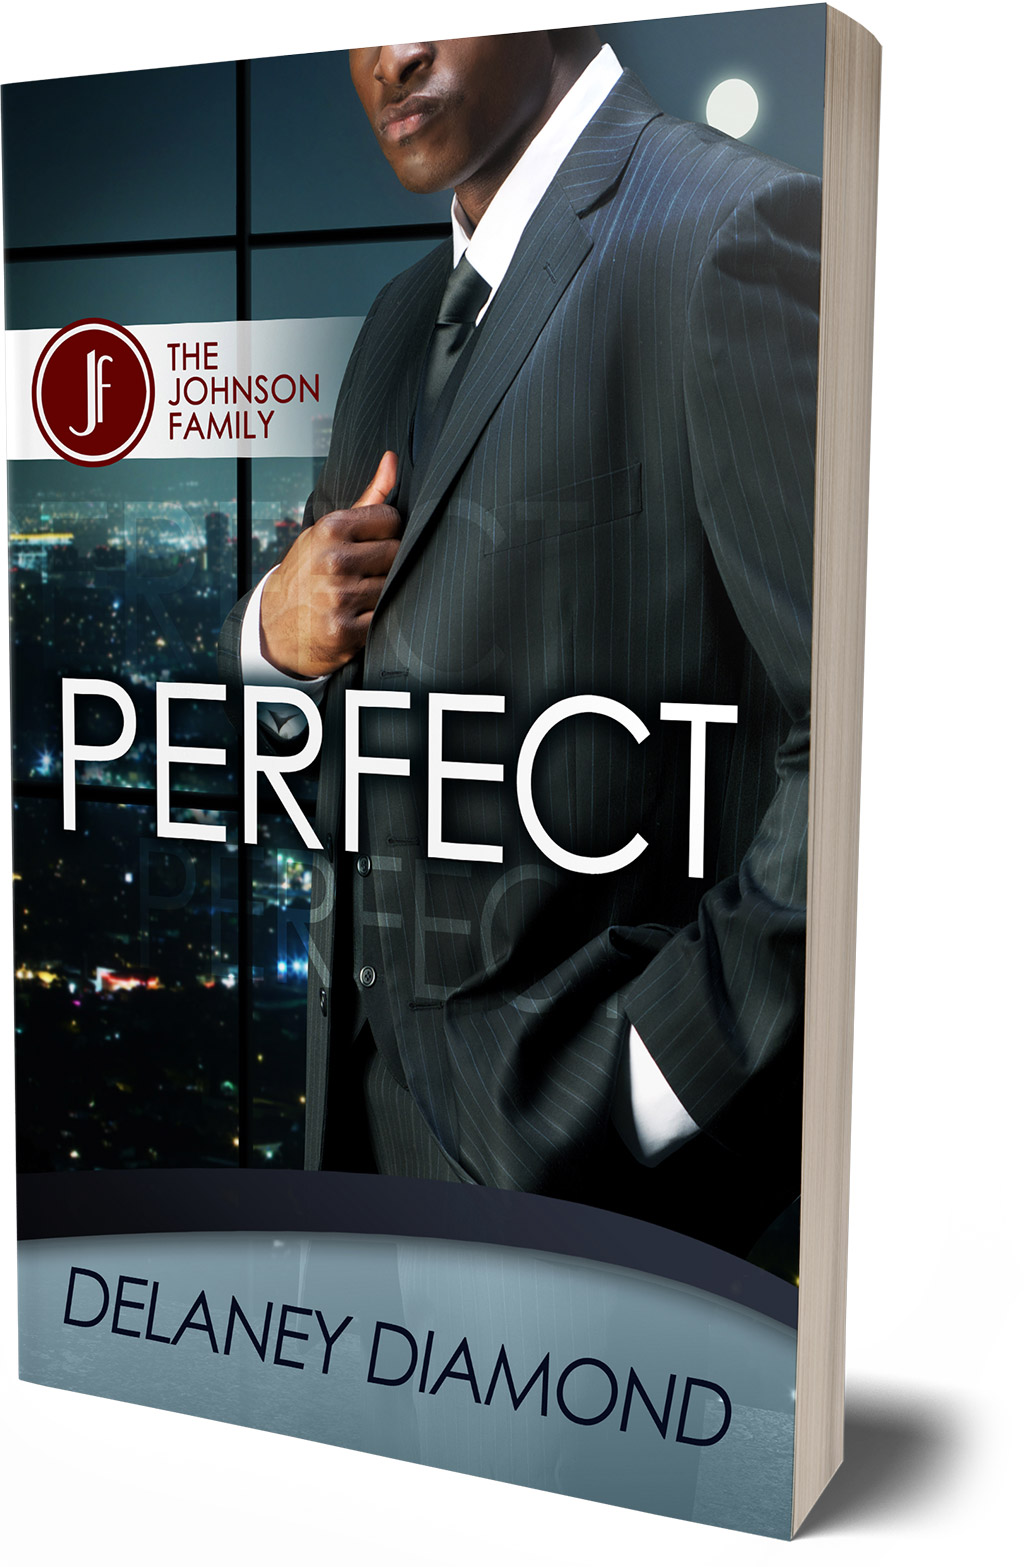 Perfect, The Johnson Family by Delaney Diamond